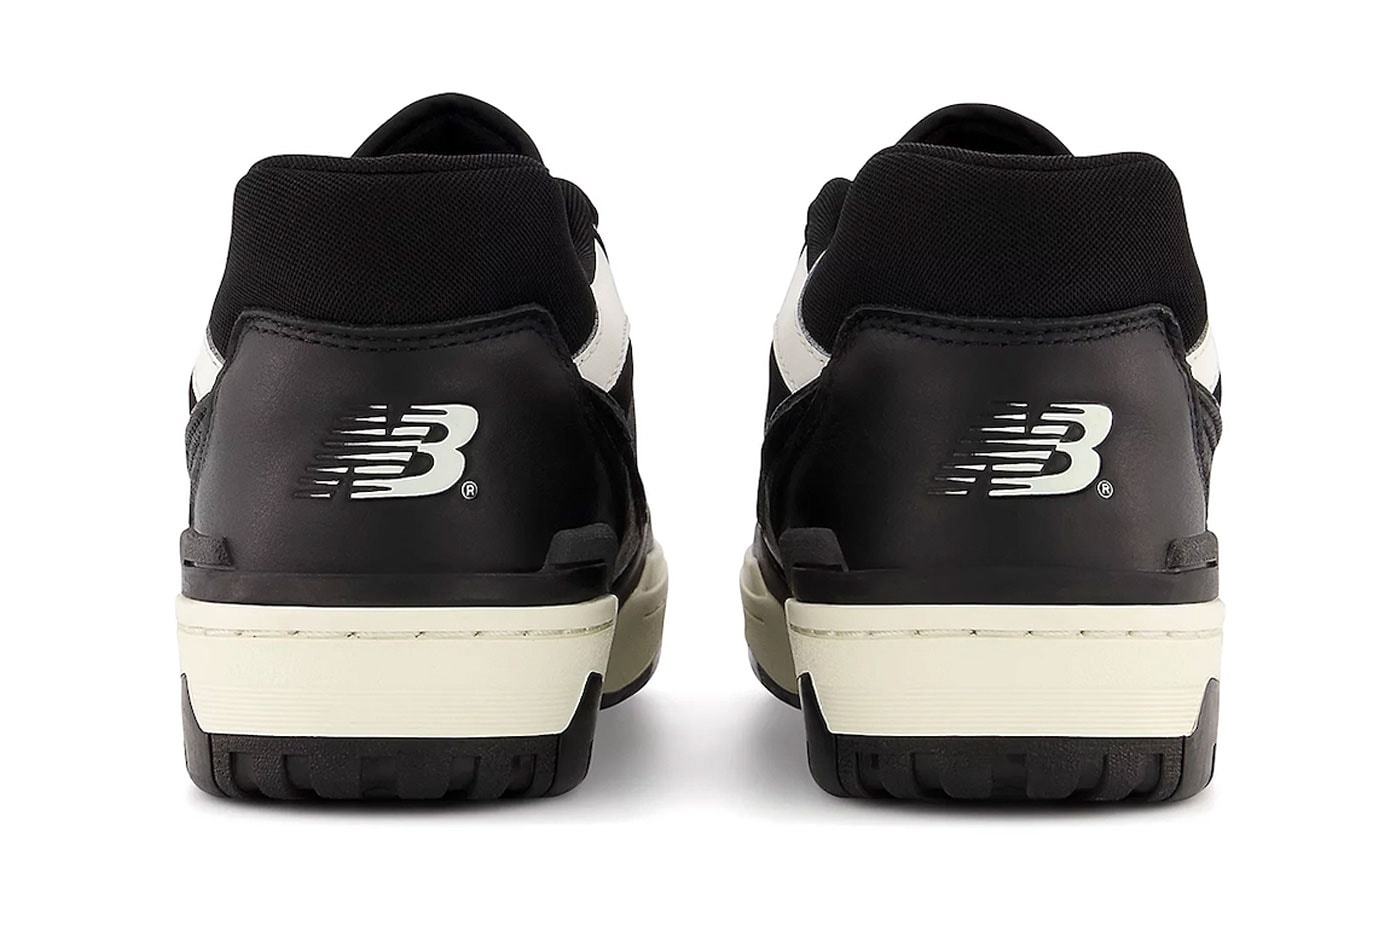 New Balance 550 Is Arriving in a "Panda" Colorway BB550LBW black and white sneakers shoes